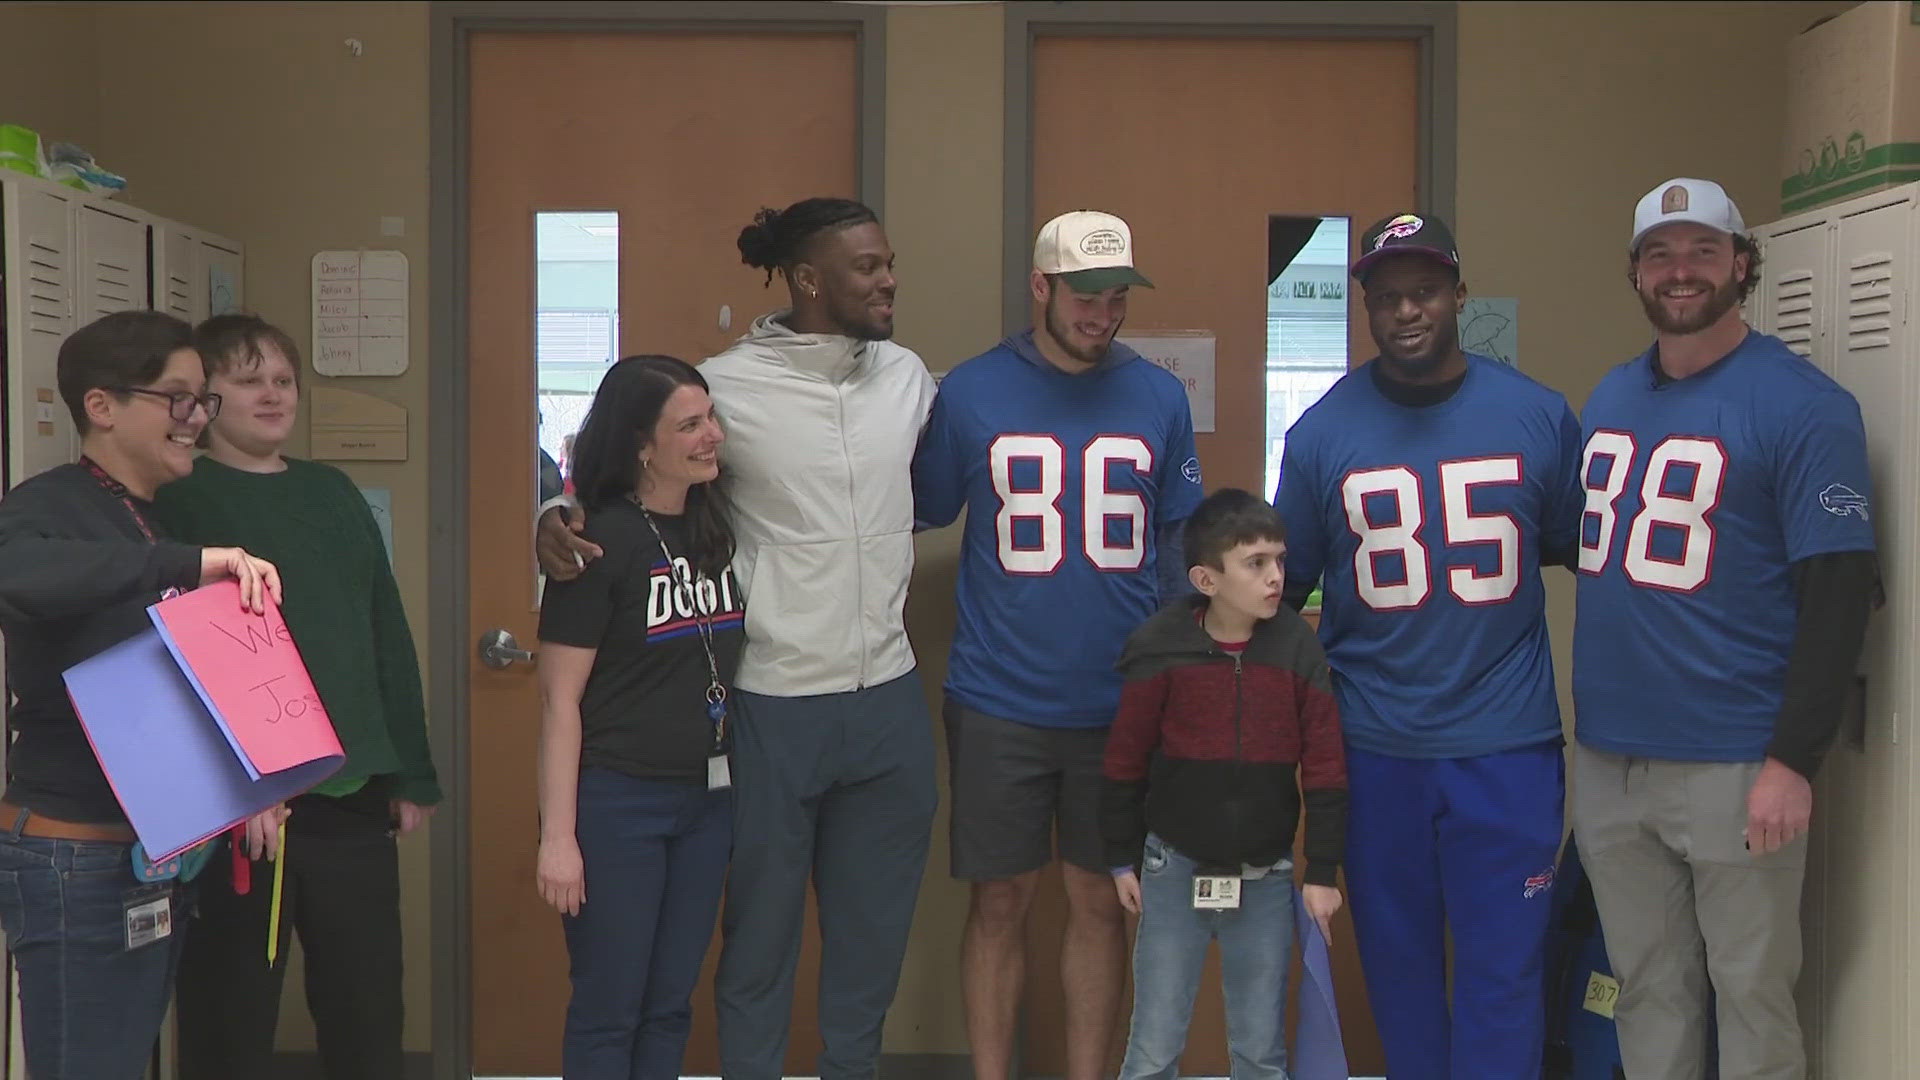 DALTON KINCAID, DAWSON KNOX, TRE' MCKITTY AND QUINTIN MORRIS VISITED CLASSROOMS AT THE ACADEMY AND SPENT TIME WITH STUDENTS AND STAFF AT THEIR SPECIAL ED SCHOOL.